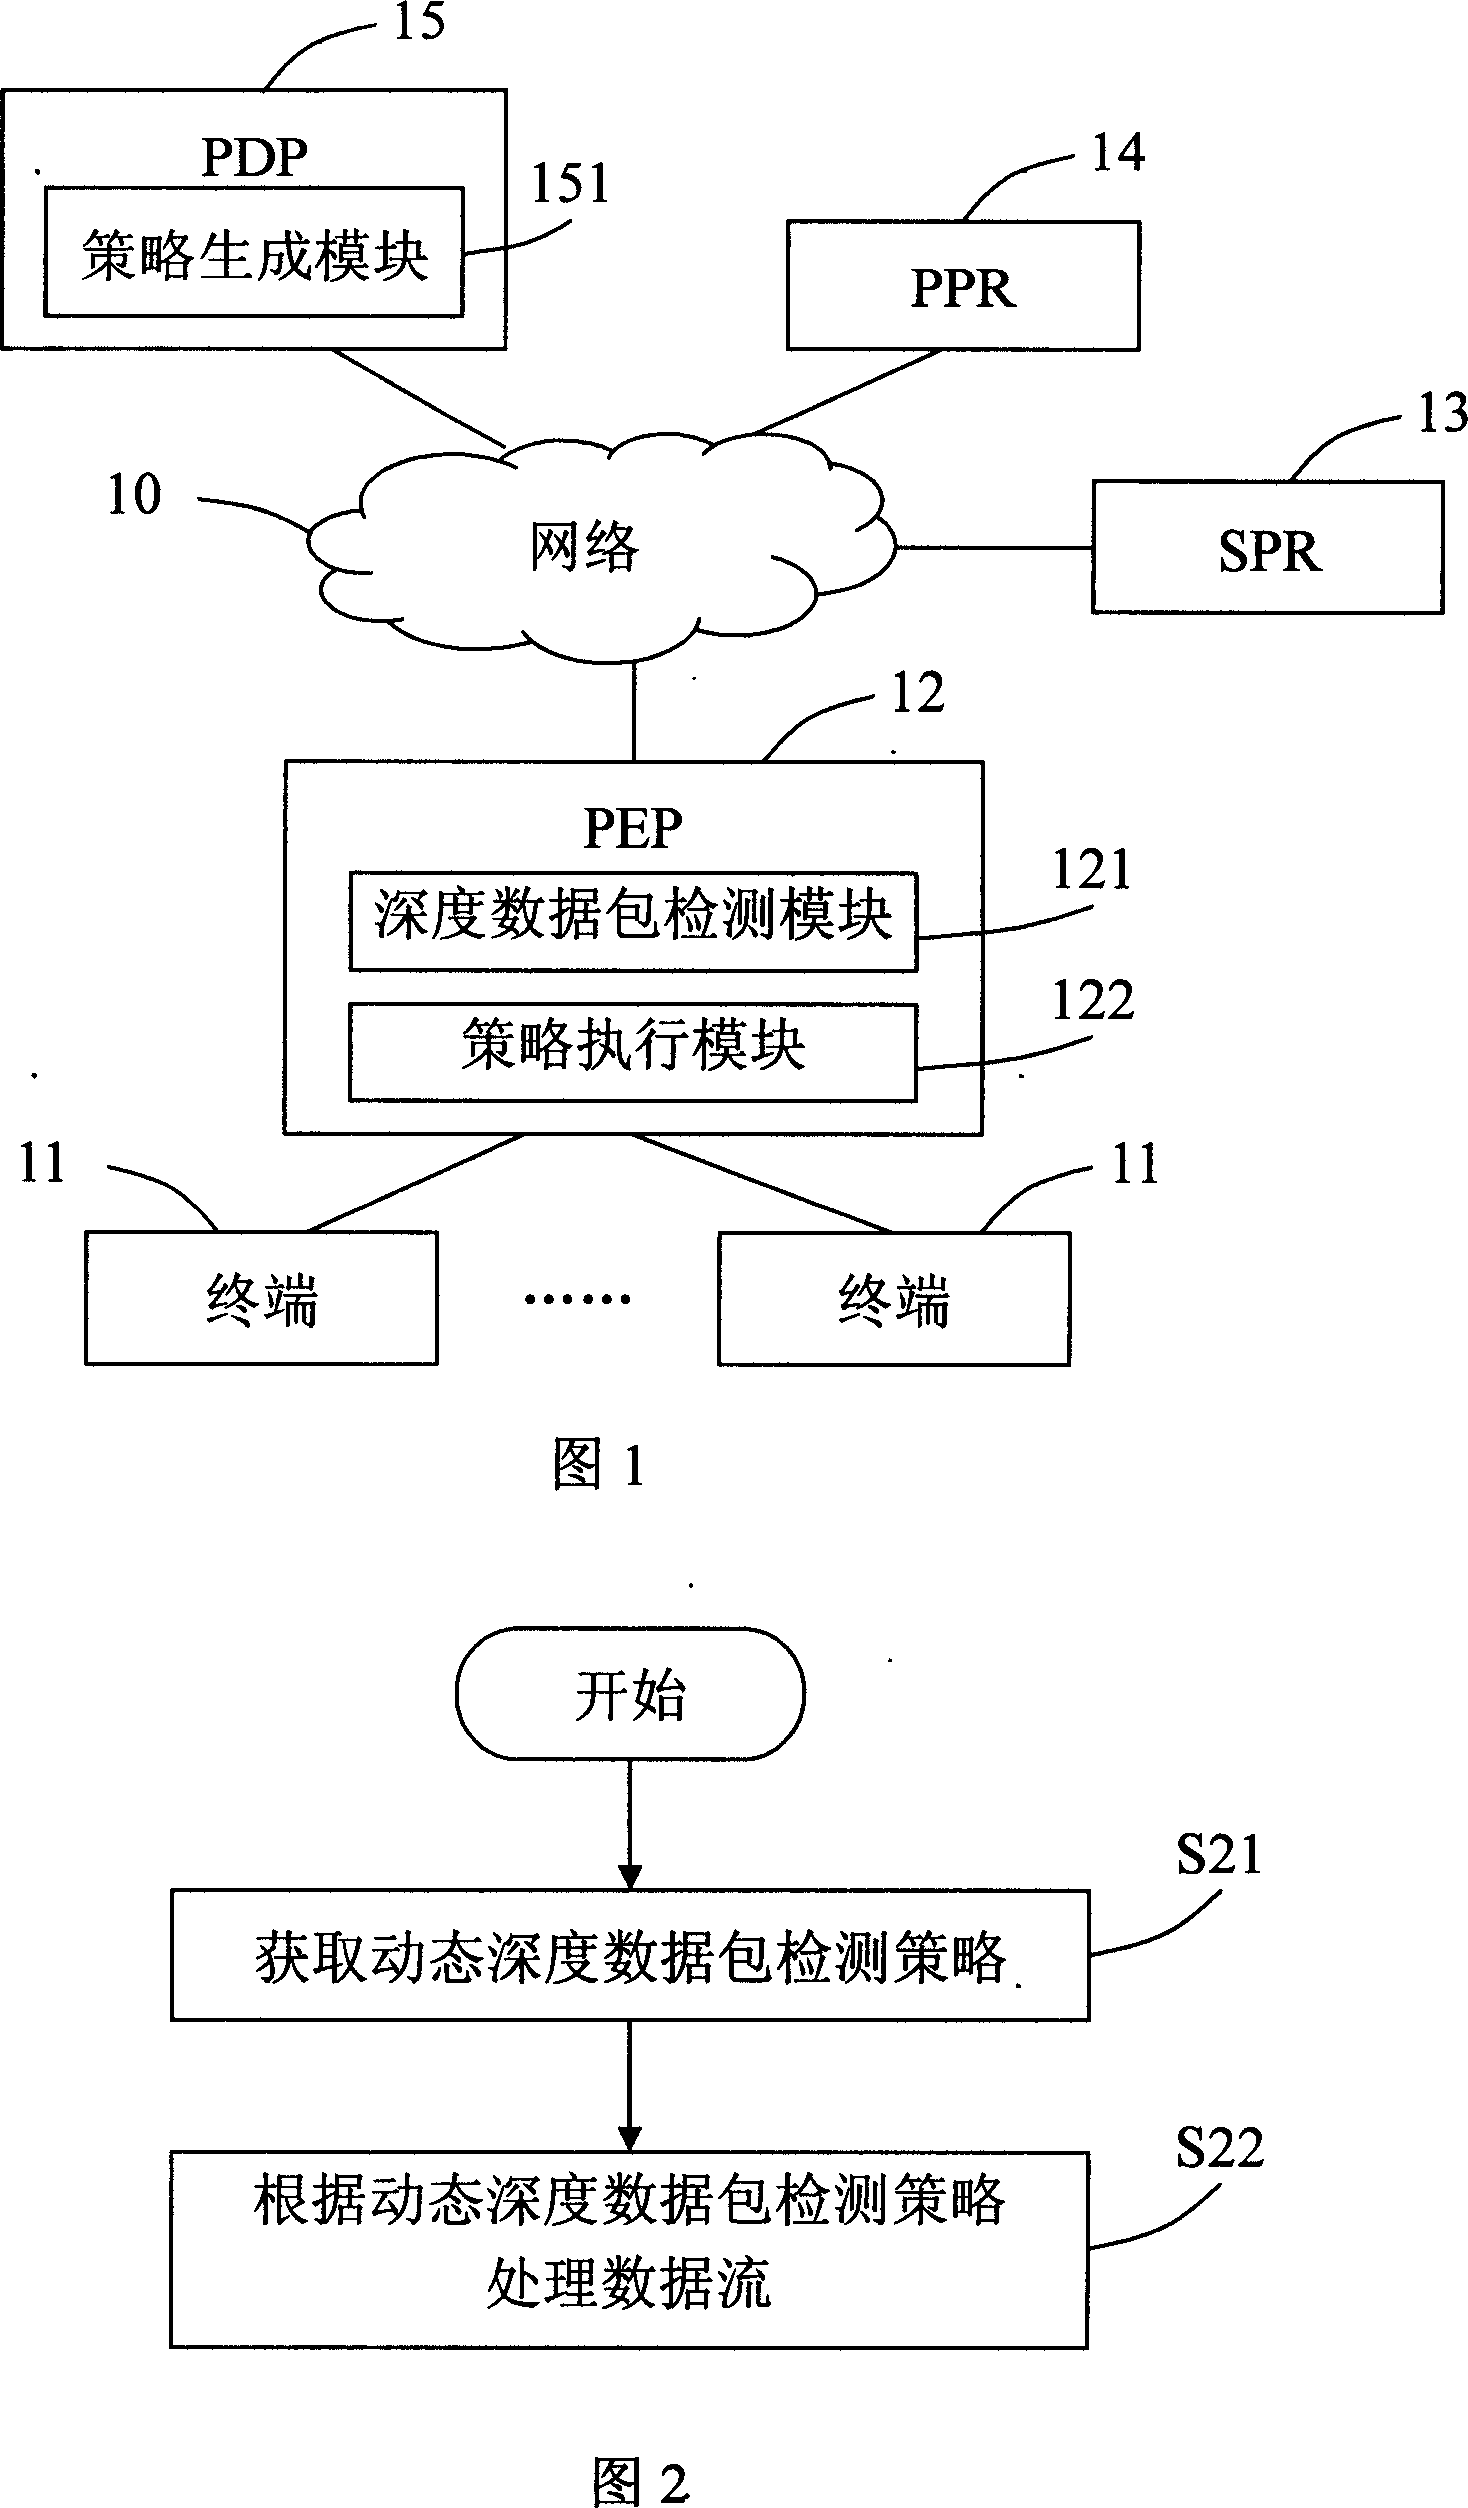 Method and system for controlling network business